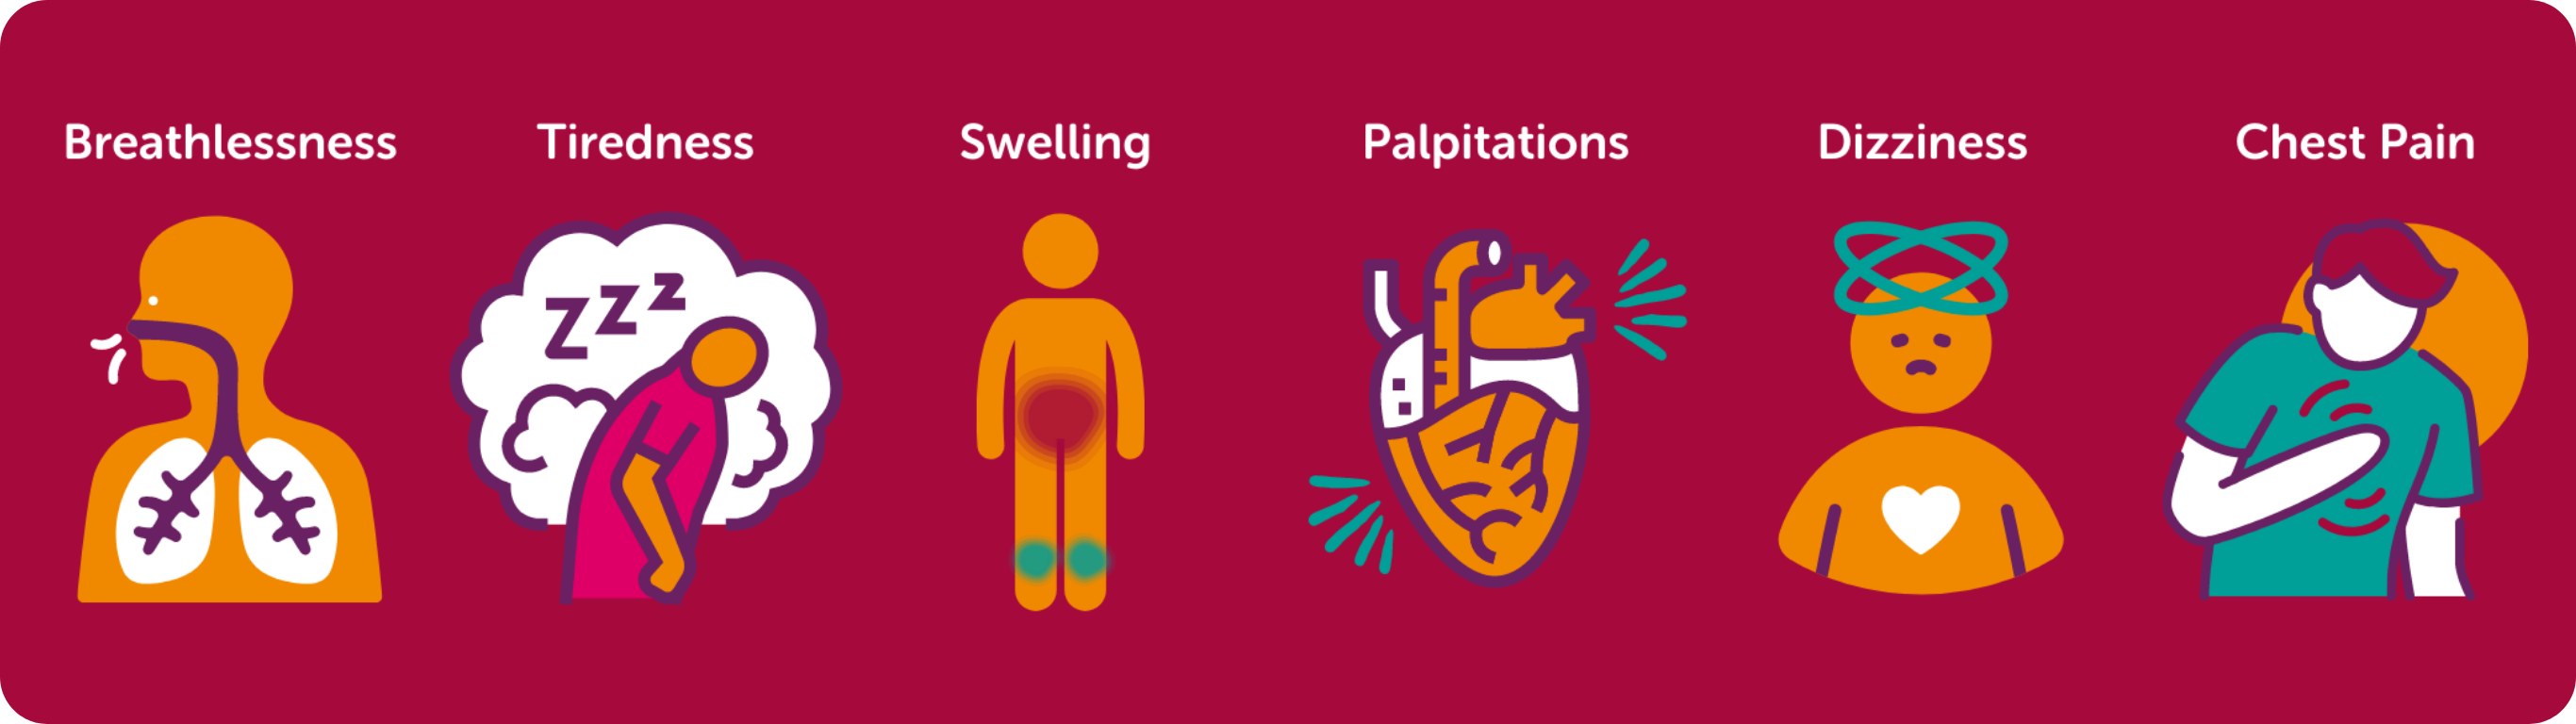 Know the symptoms, breathlessness, tiredness, swelling, palpitations, dizziness and chest pain